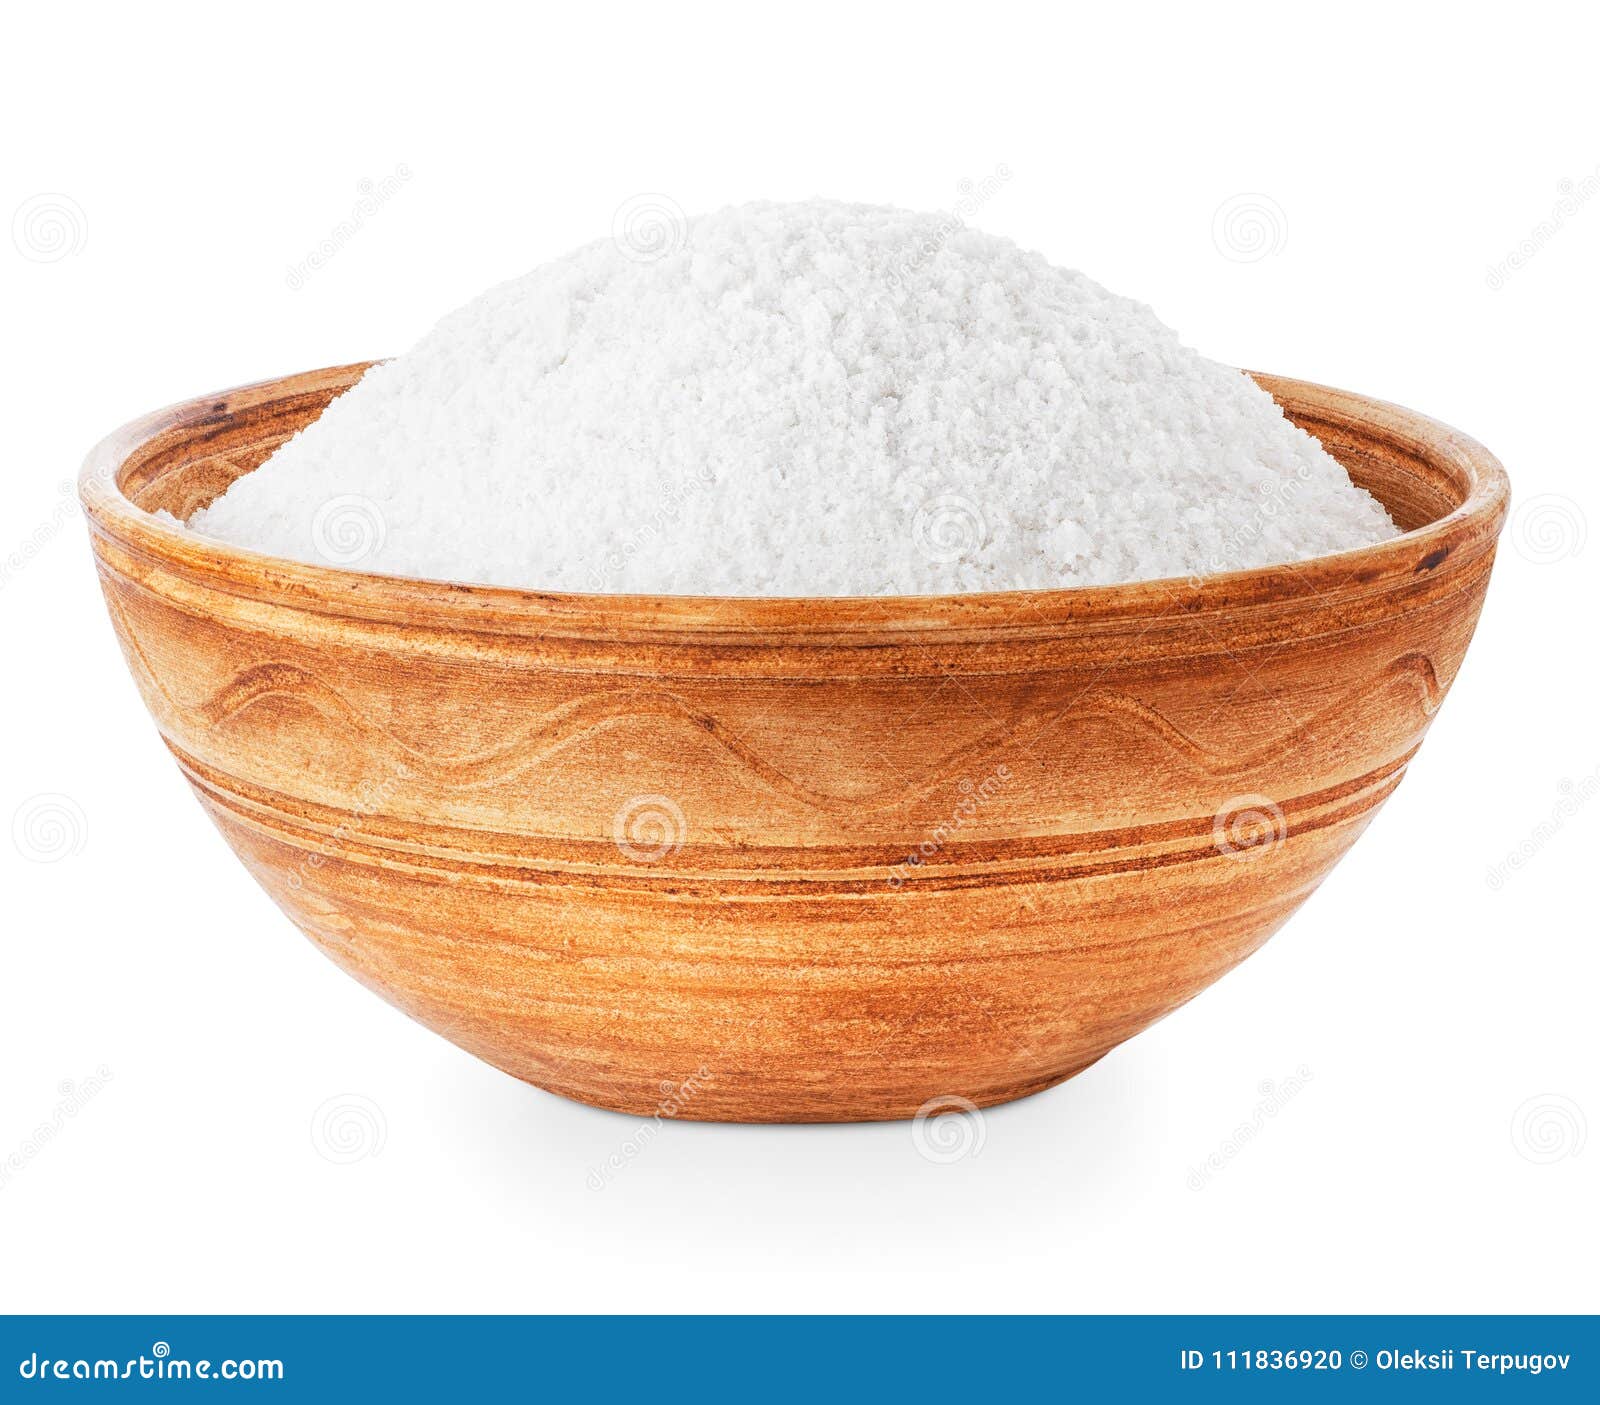 Salt in bowl stock photo. Image of background, closeup 111836920